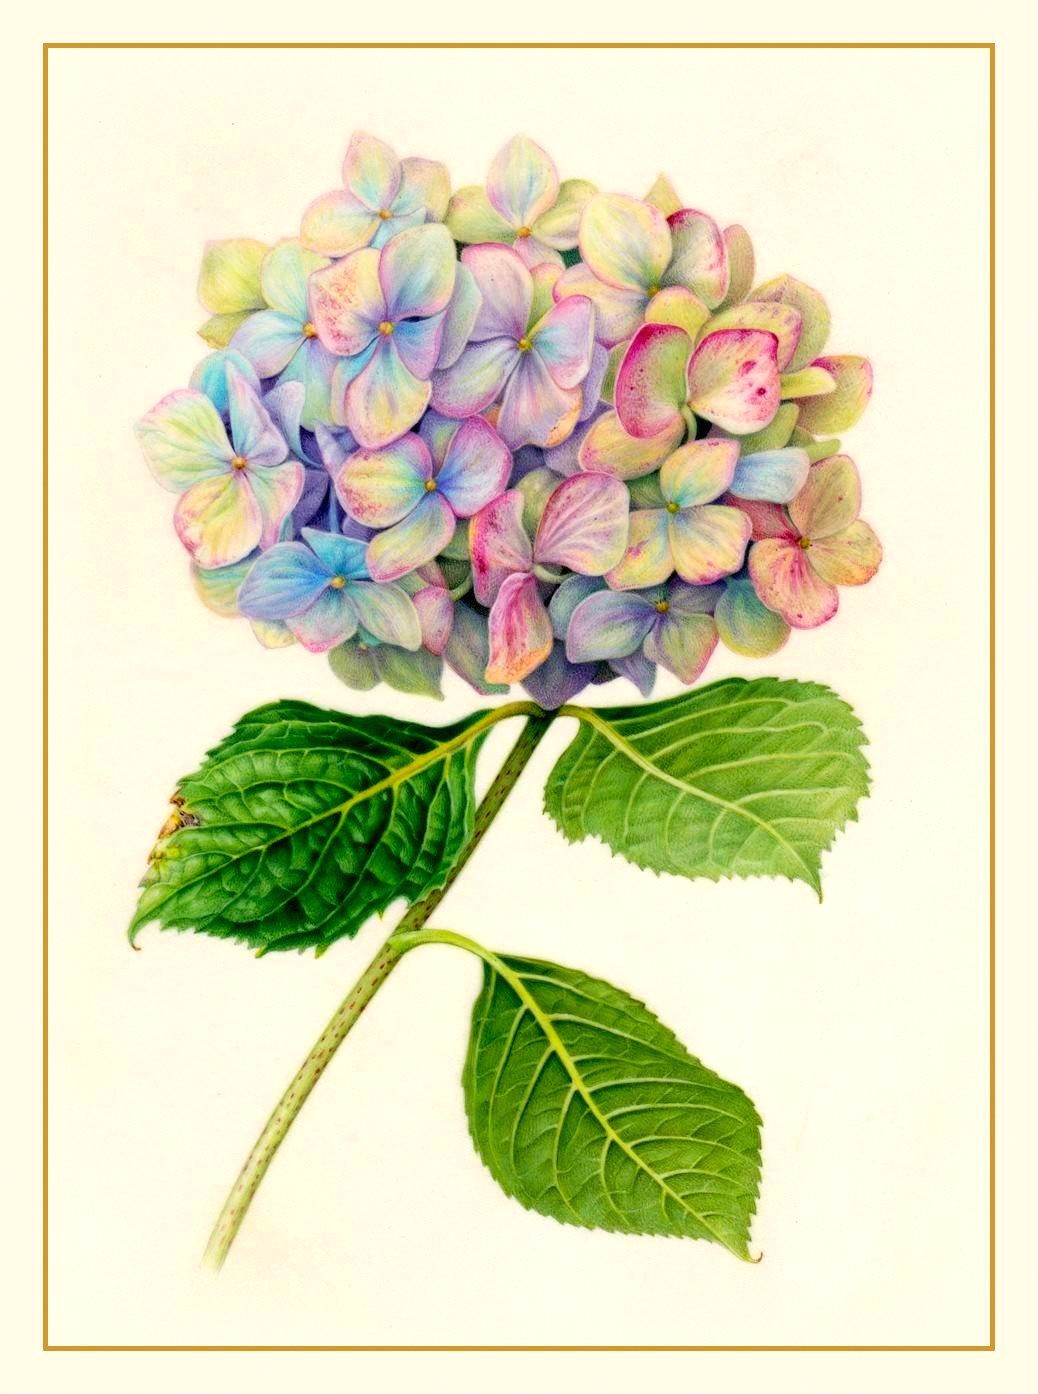 Drawings Of Hydrangea Flowers Pin by Claudia Young On Geraniums and Hydrangeas Pinterest